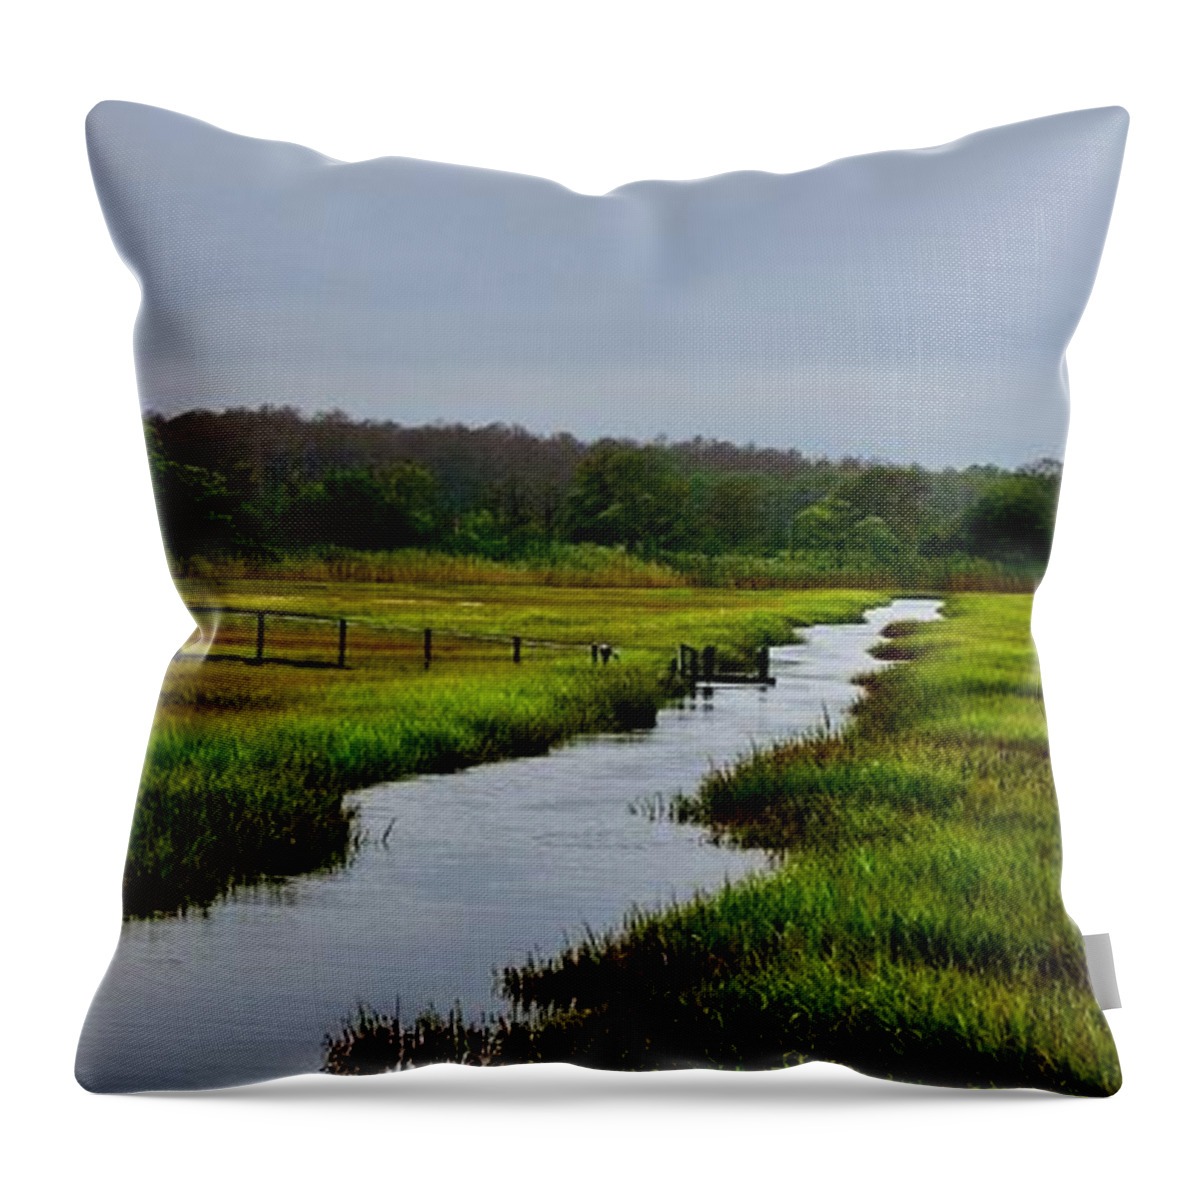 Marsh Throw Pillow featuring the photograph The Water Road Through the Marsh by Shawn M Greener